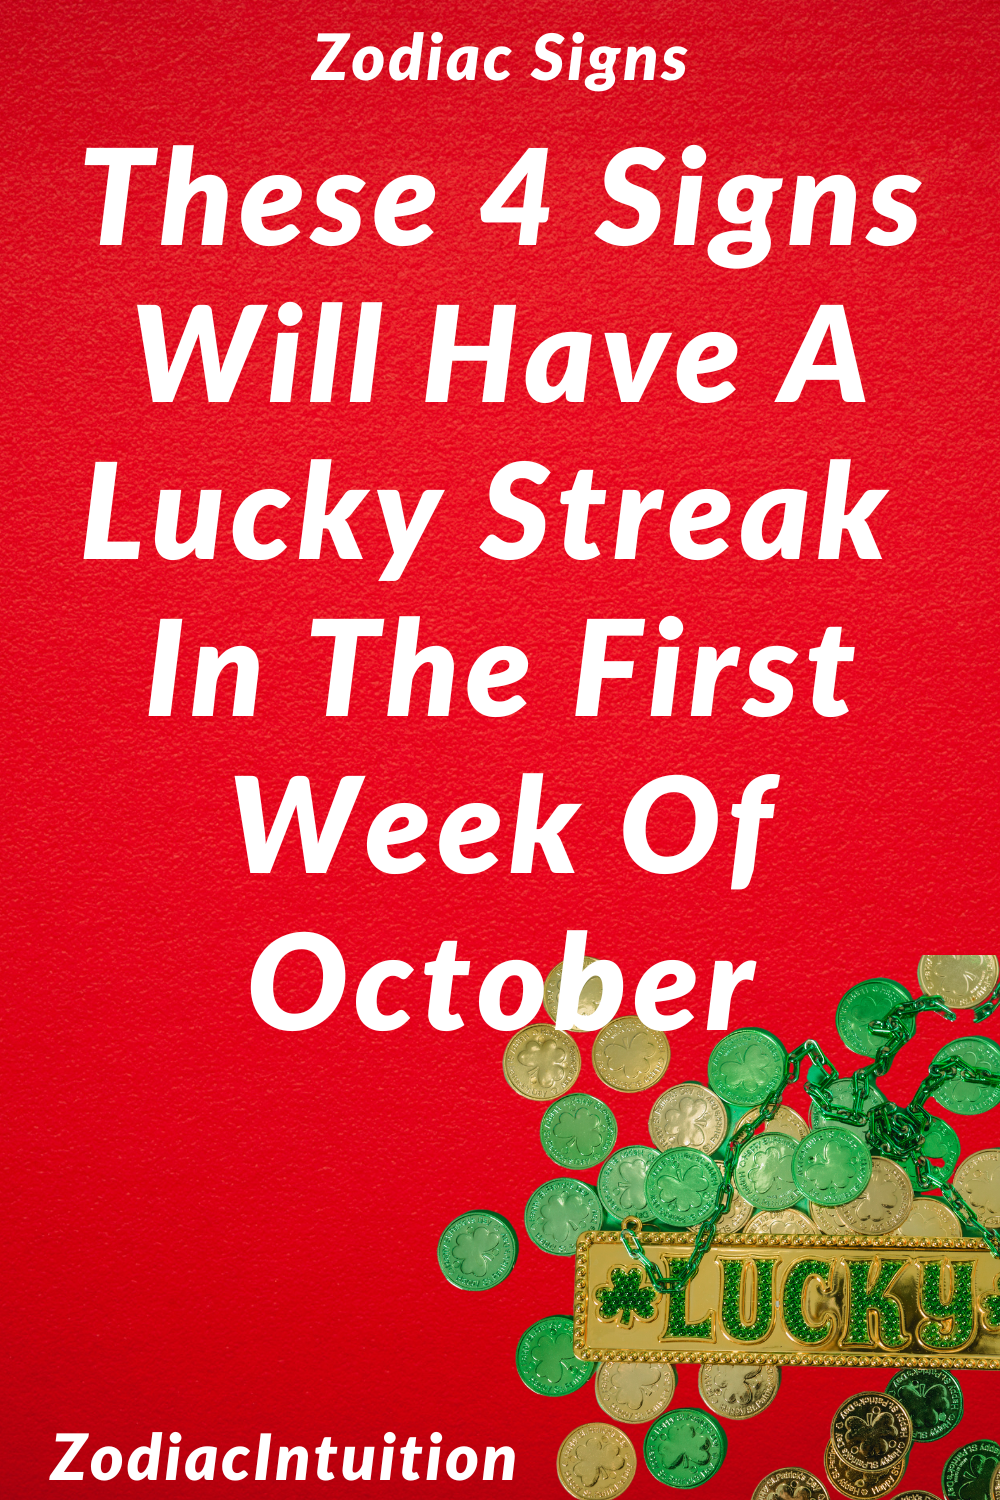 These 4 Signs Will Have A Lucky Streak In The First Week Of October